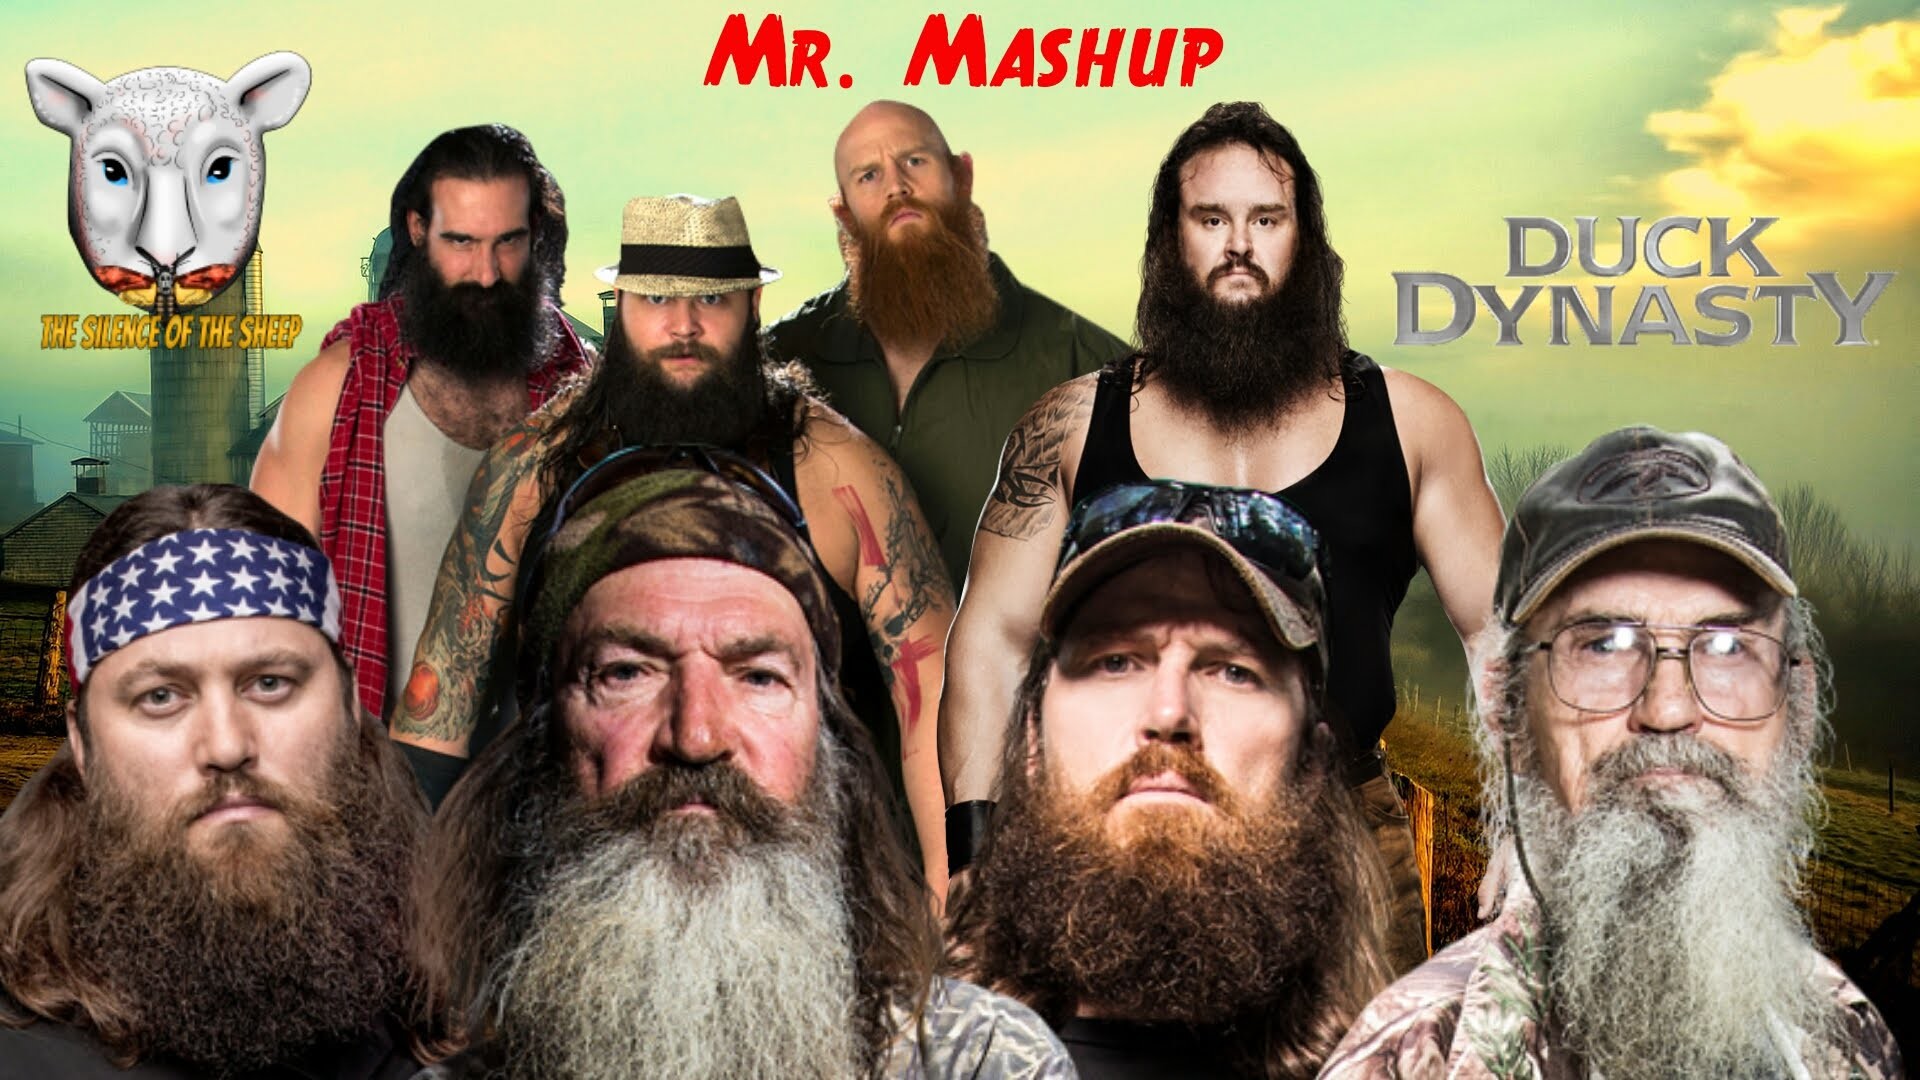 1920x1080 WWE Mashup: Duck Dynasty and The Wyatt Family "Sharp Dressed Men Living in  Fear"